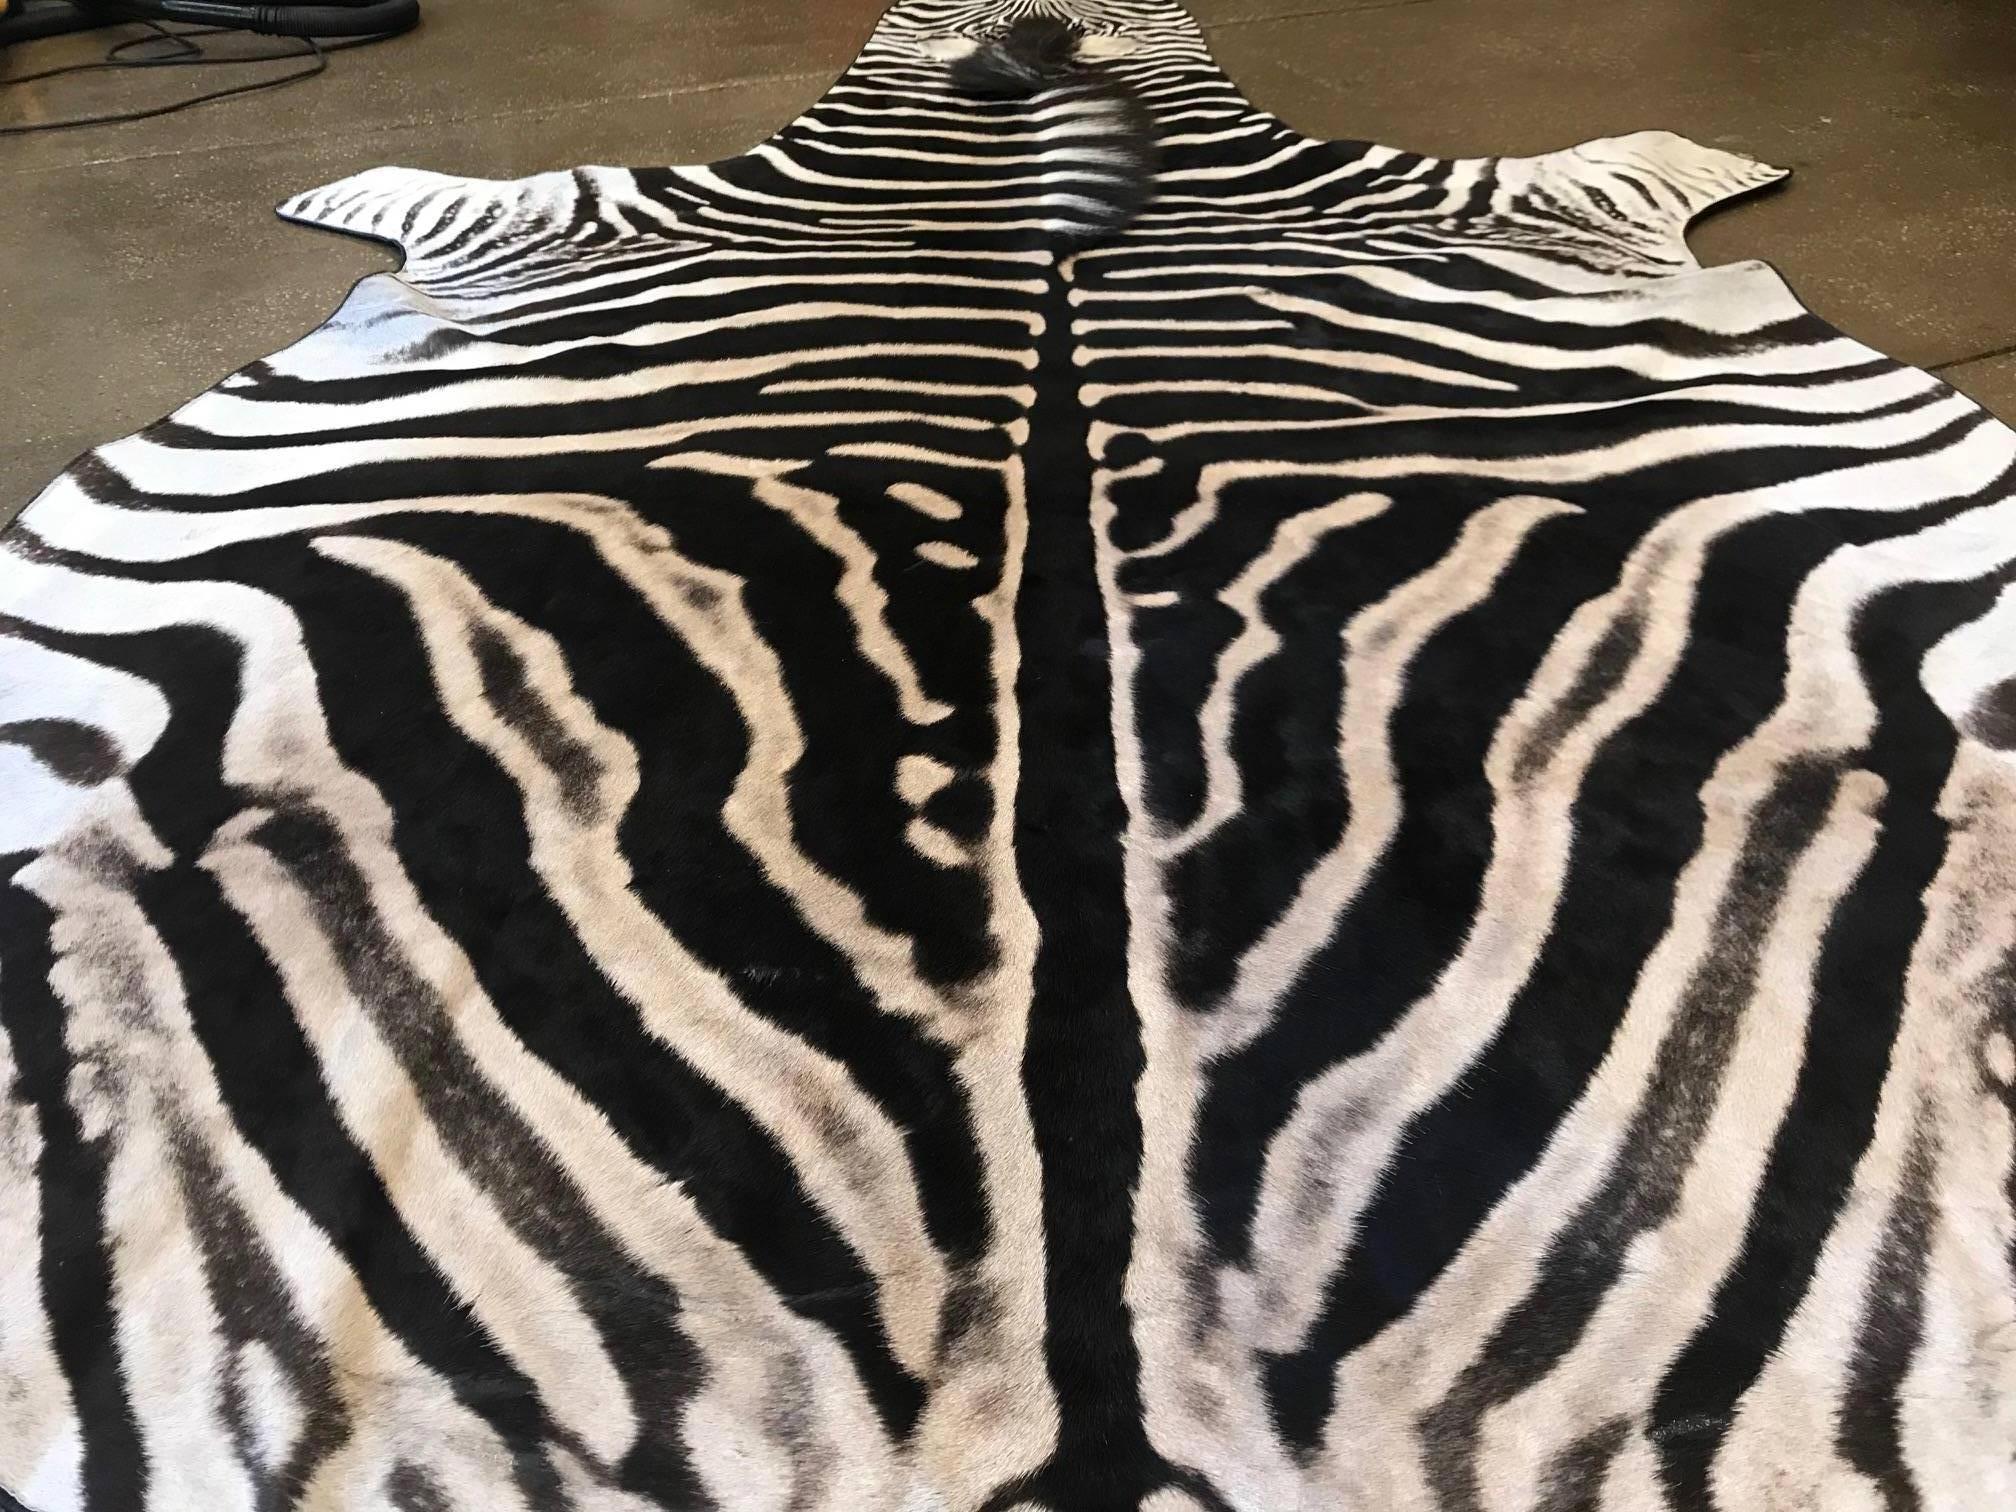 Beautiful grade “A” zebra rug lined with leather trim all around.
Measures: 8'2'' x 5' long excluding the tail 
Large selection of hide in different sizes and qualities

 